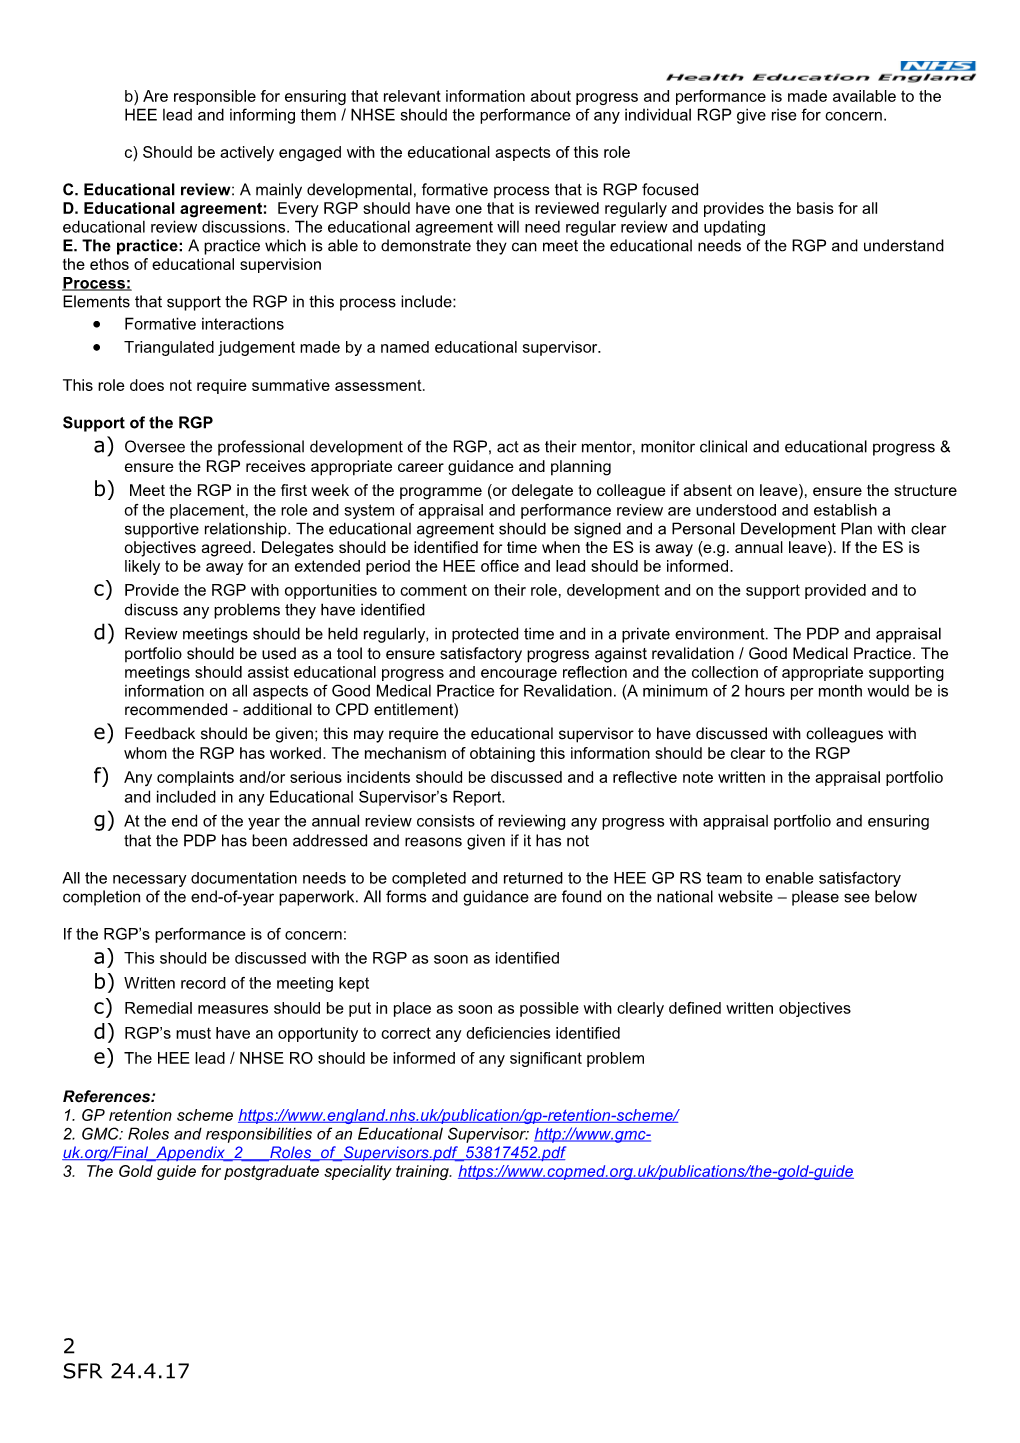 Educational Supervisor Guide Application/Annual Review